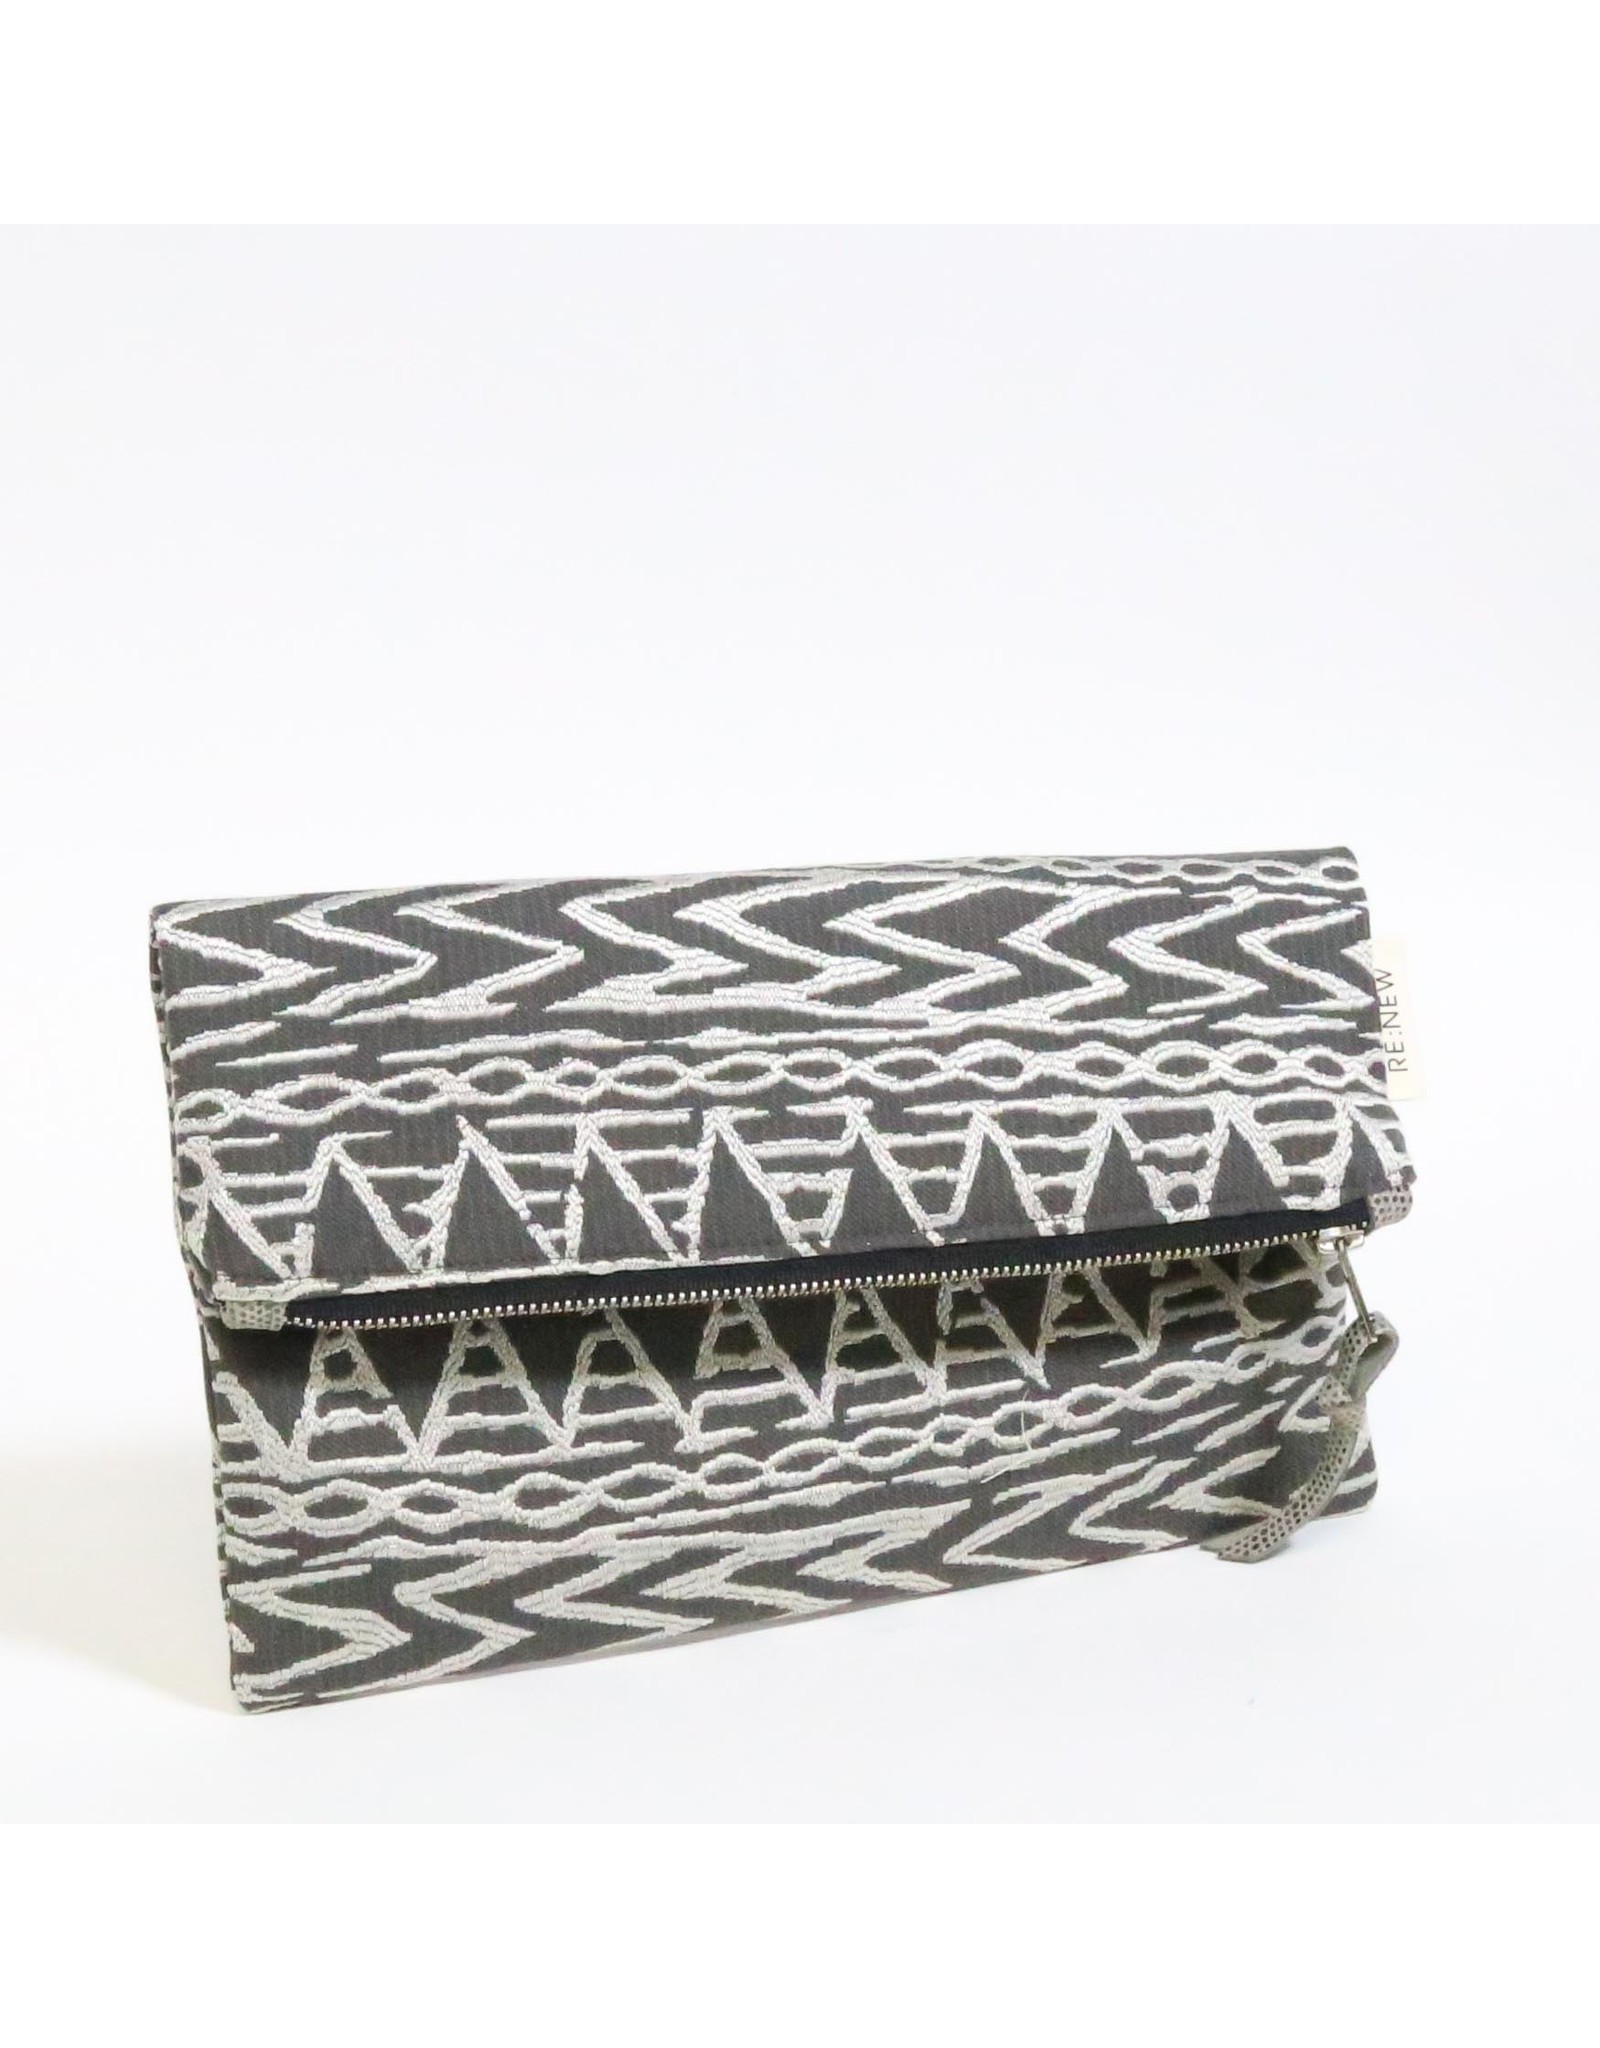 Re:new Project Ahlam Clutch